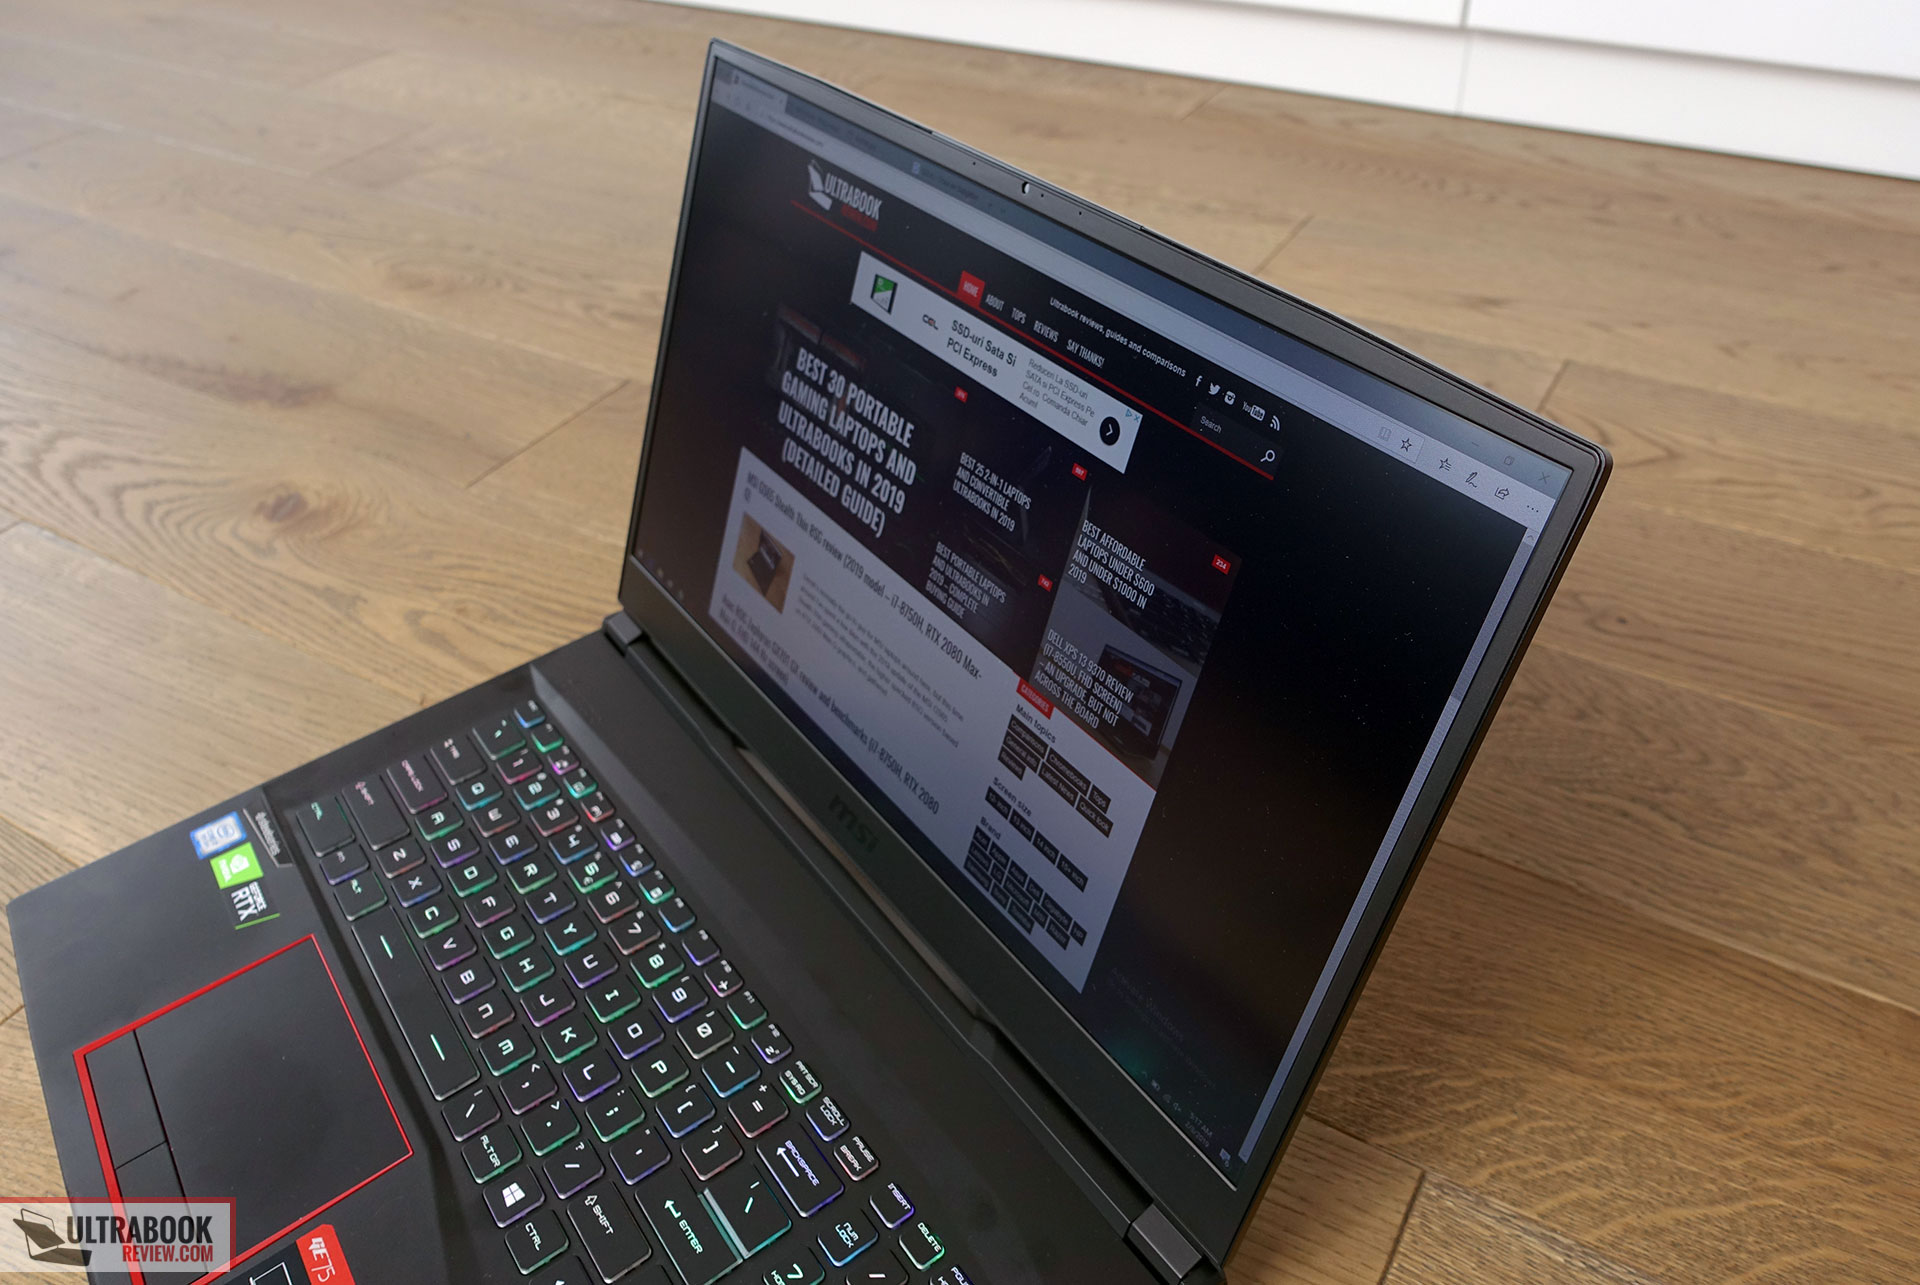 MSI GE75 Raider 8SE review and benchmarks (i7, RTX 2060)